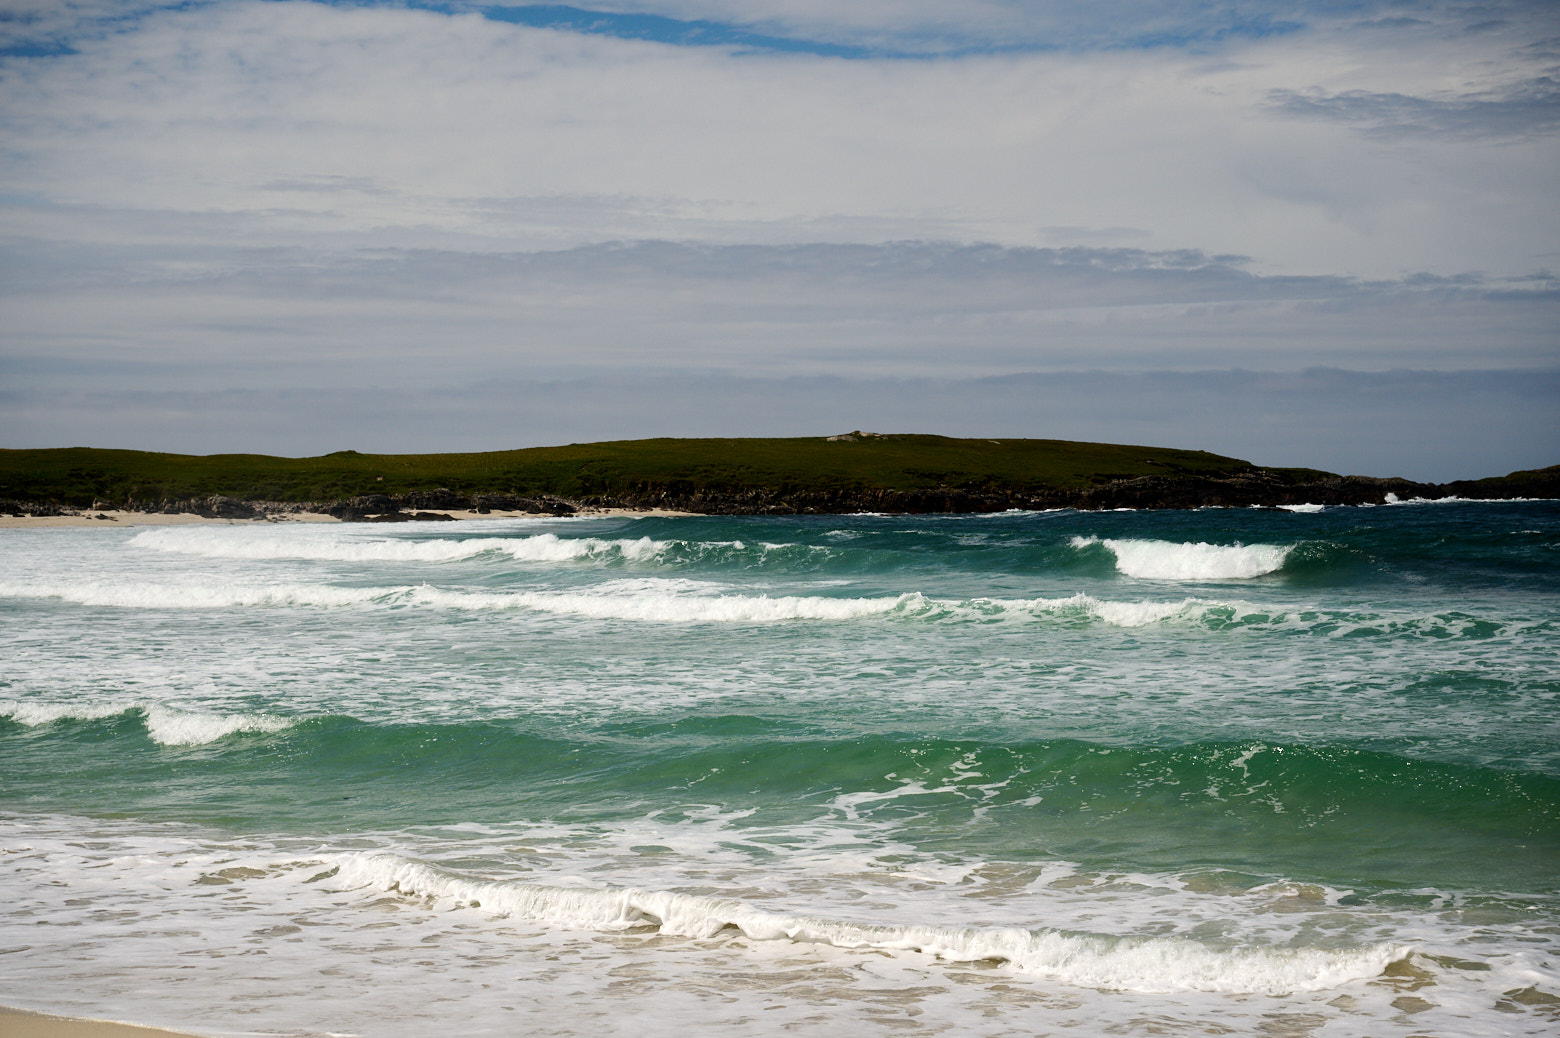 Traigh stir in North Uist and a view of St Kilda, Outer Hebrides.